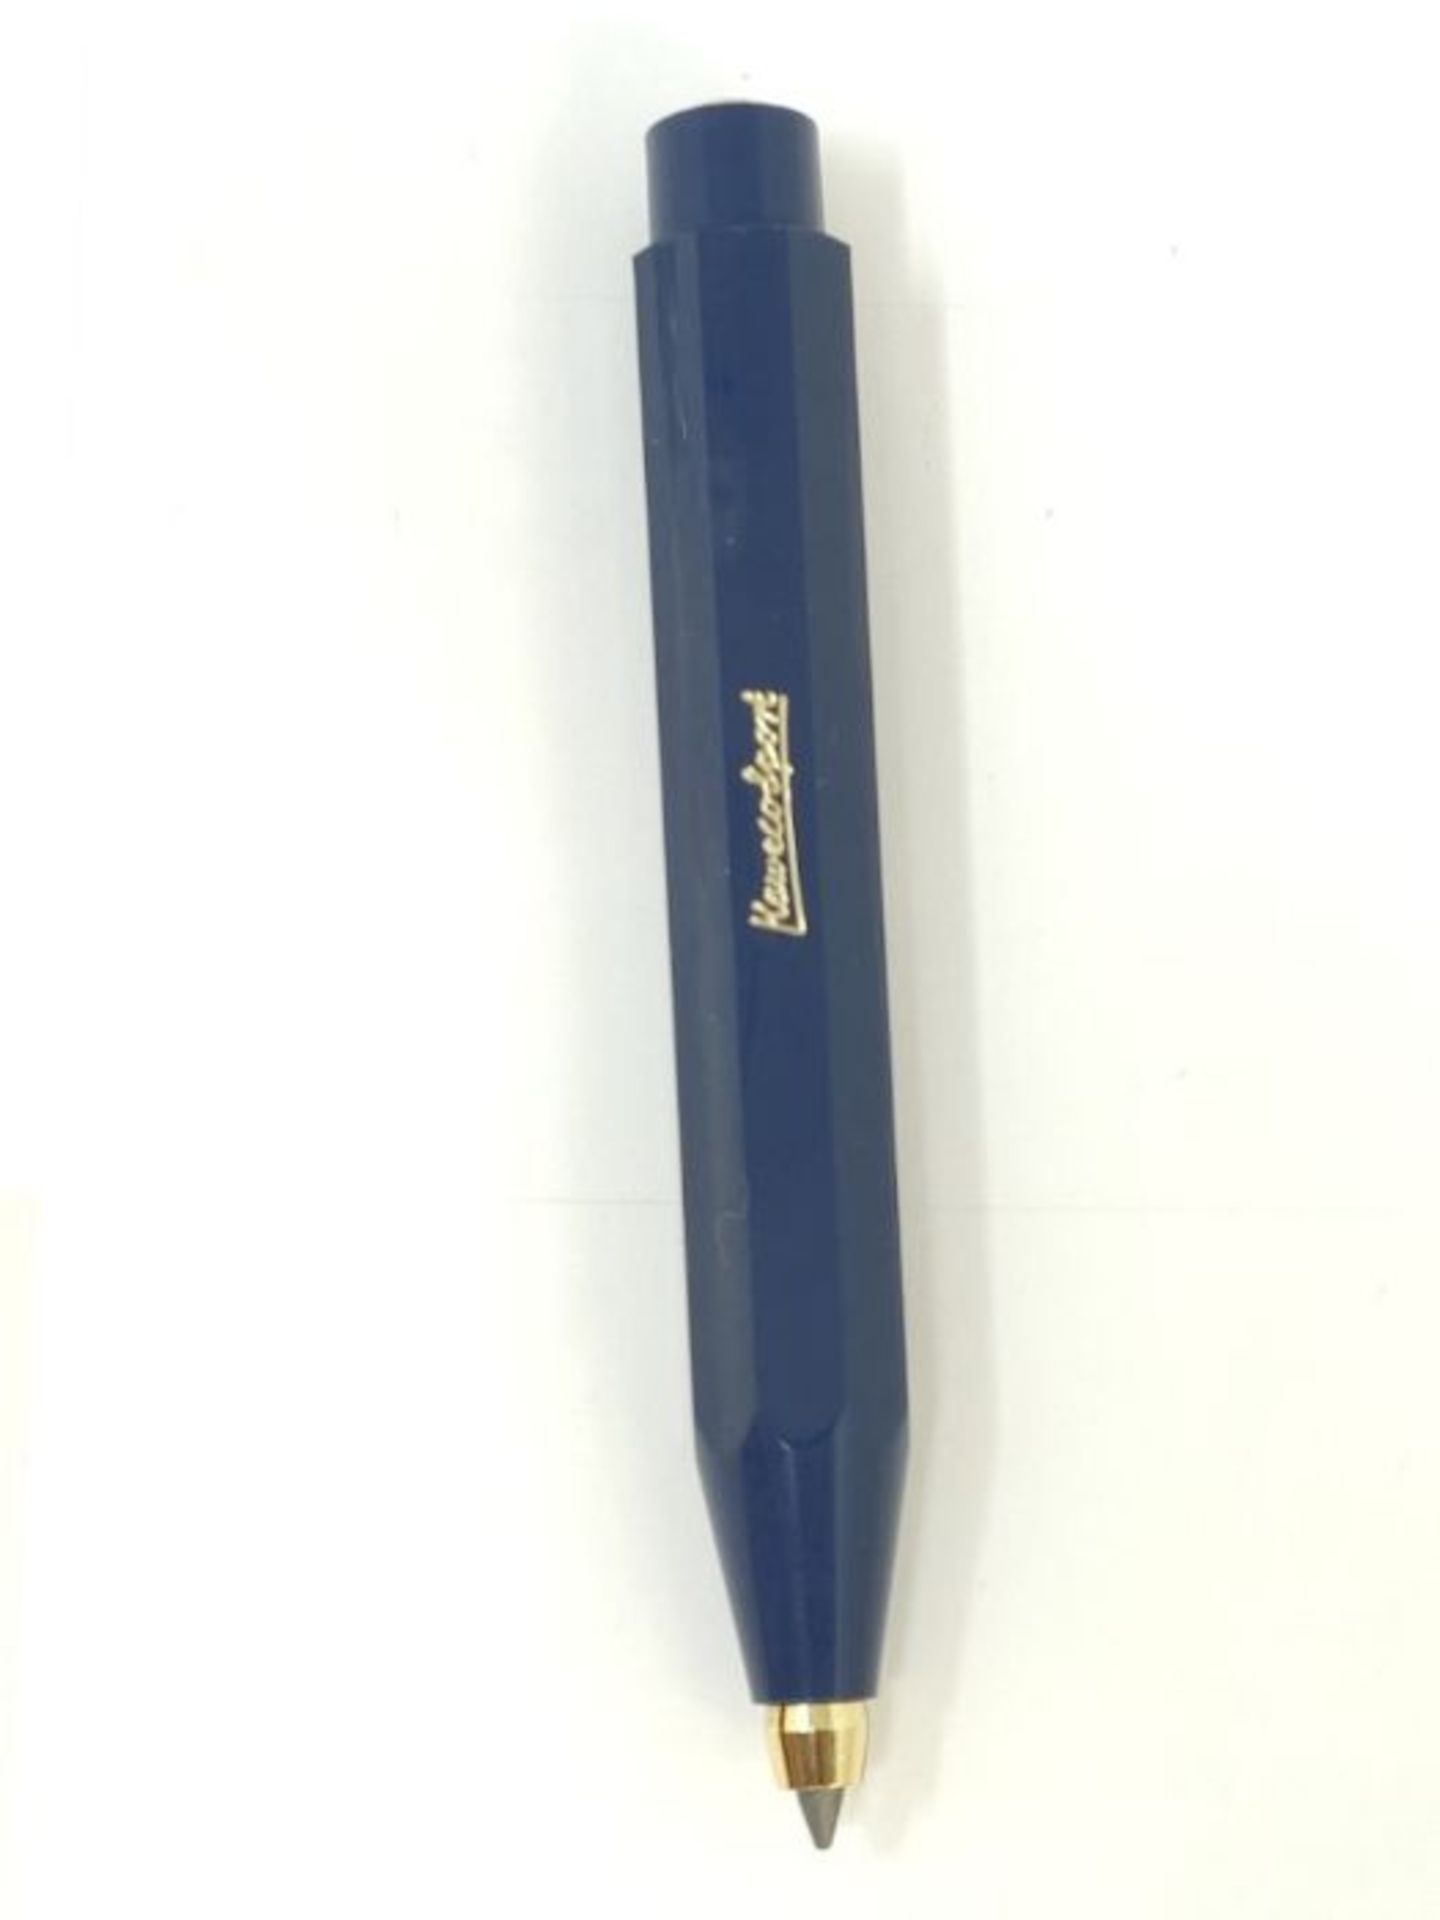 Kaweco CLASSIC SPORT Clutch Pencil Navy 3.2 mm - Image 2 of 2